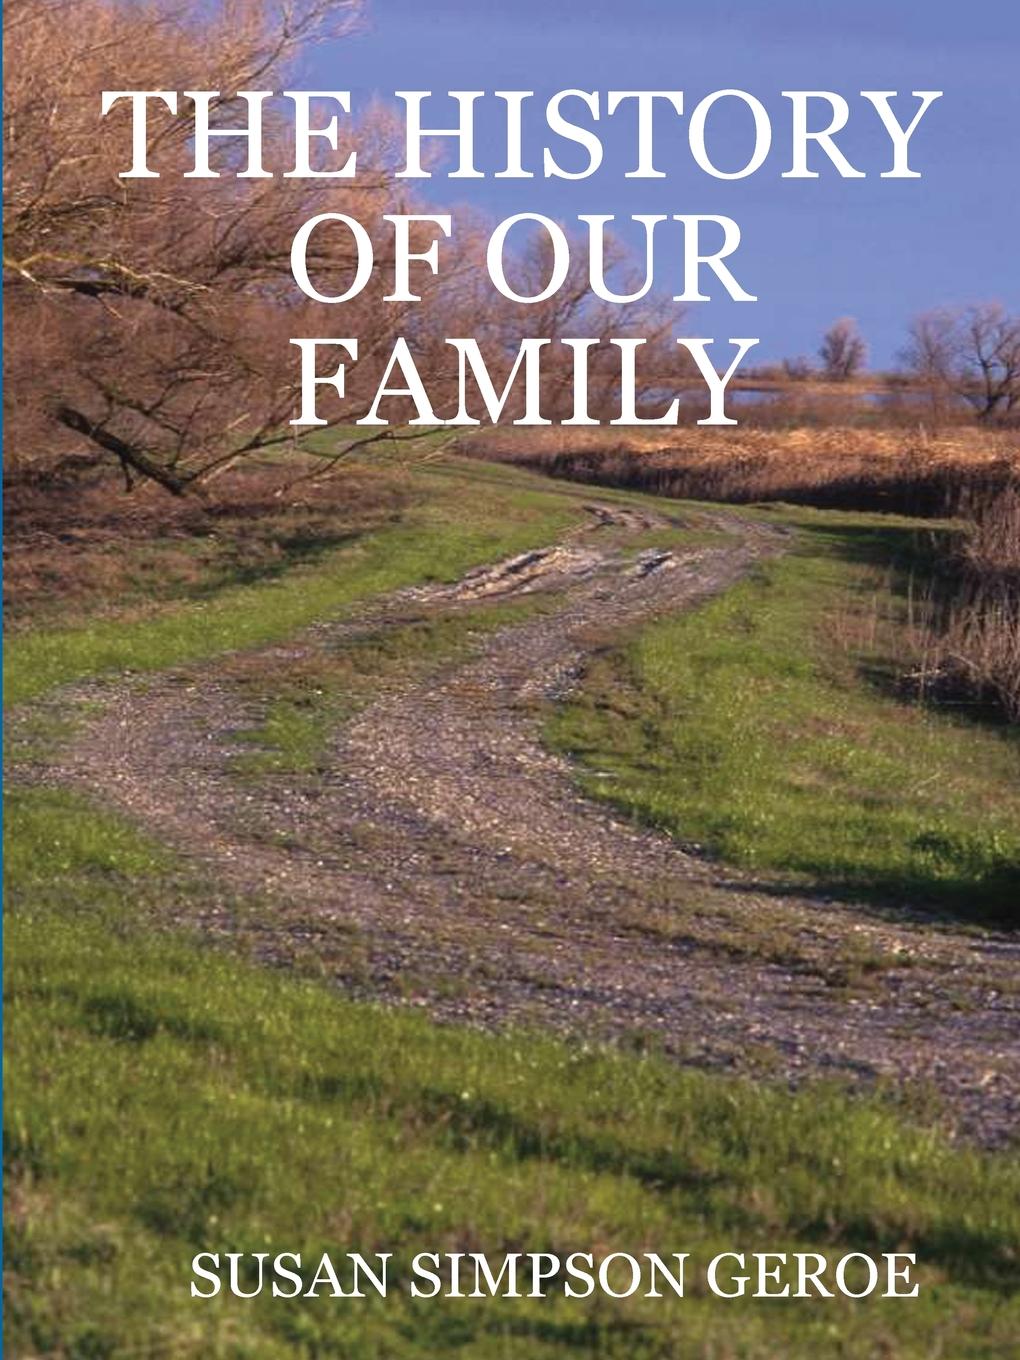 SUSAN SIMPSON GEROE THE HISTORY OF OUR FAMILY in B/W